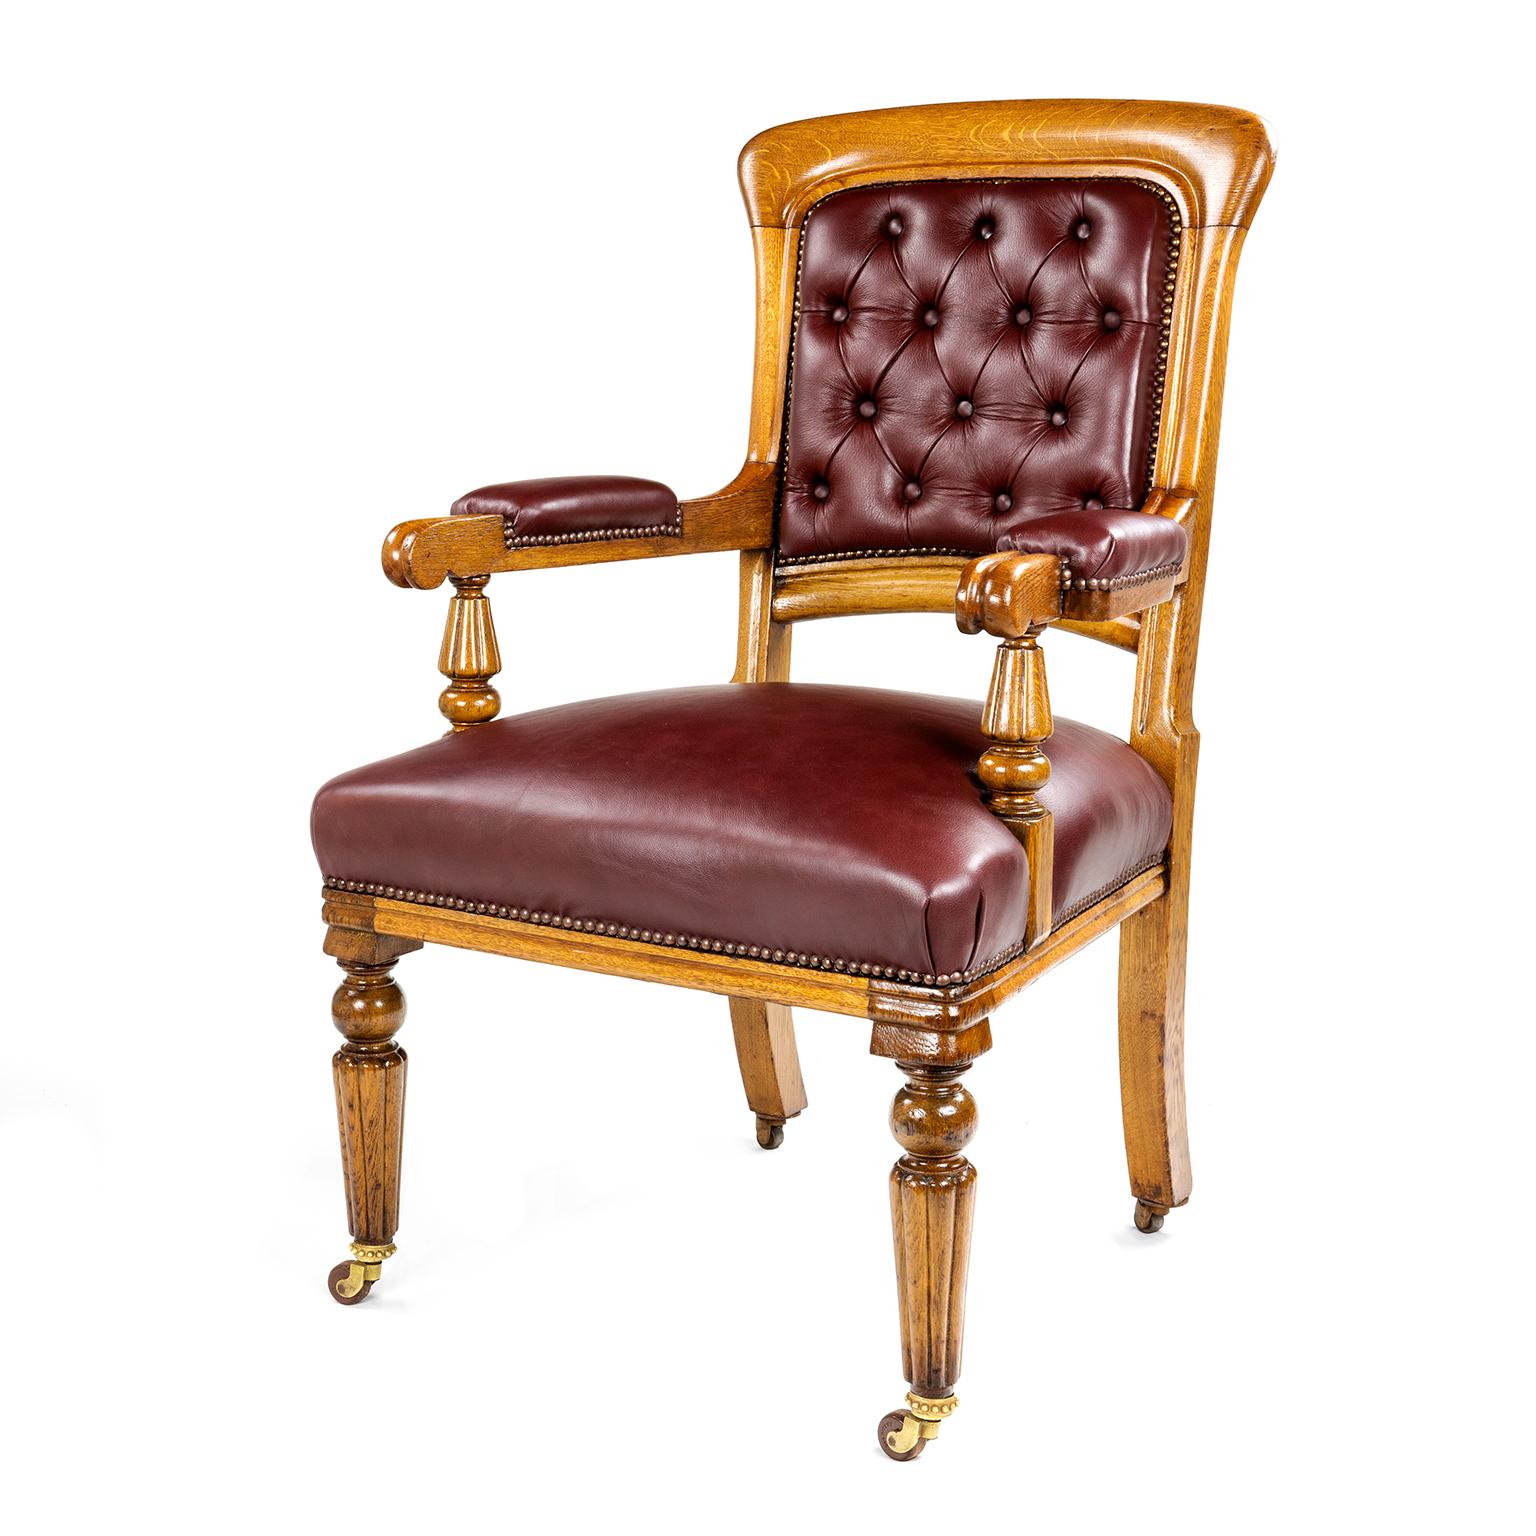 Victorian Gillows Oak Town Hall or Ceremonial Chair